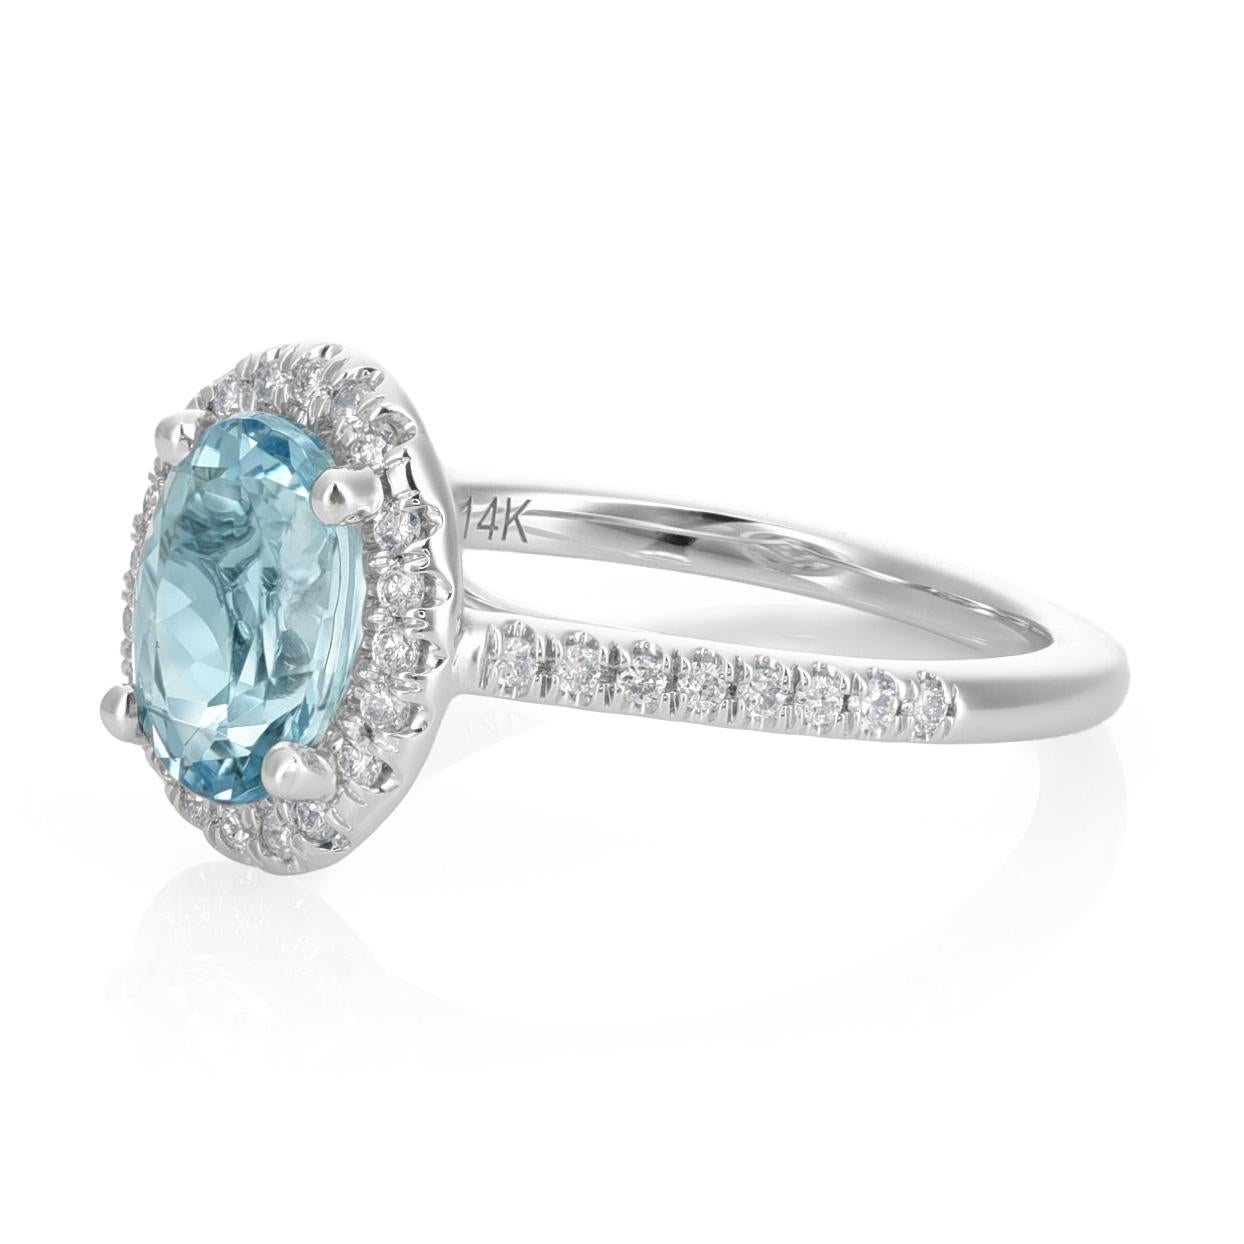 Elevate your style with this exquisite 14K White Gold Ring showcasing a 1.48 carats Natural Aquamarine in a captivating oval shape. The serene blue tones of the Aquamarine are intensified through a carefully applied heating process, enhancing its